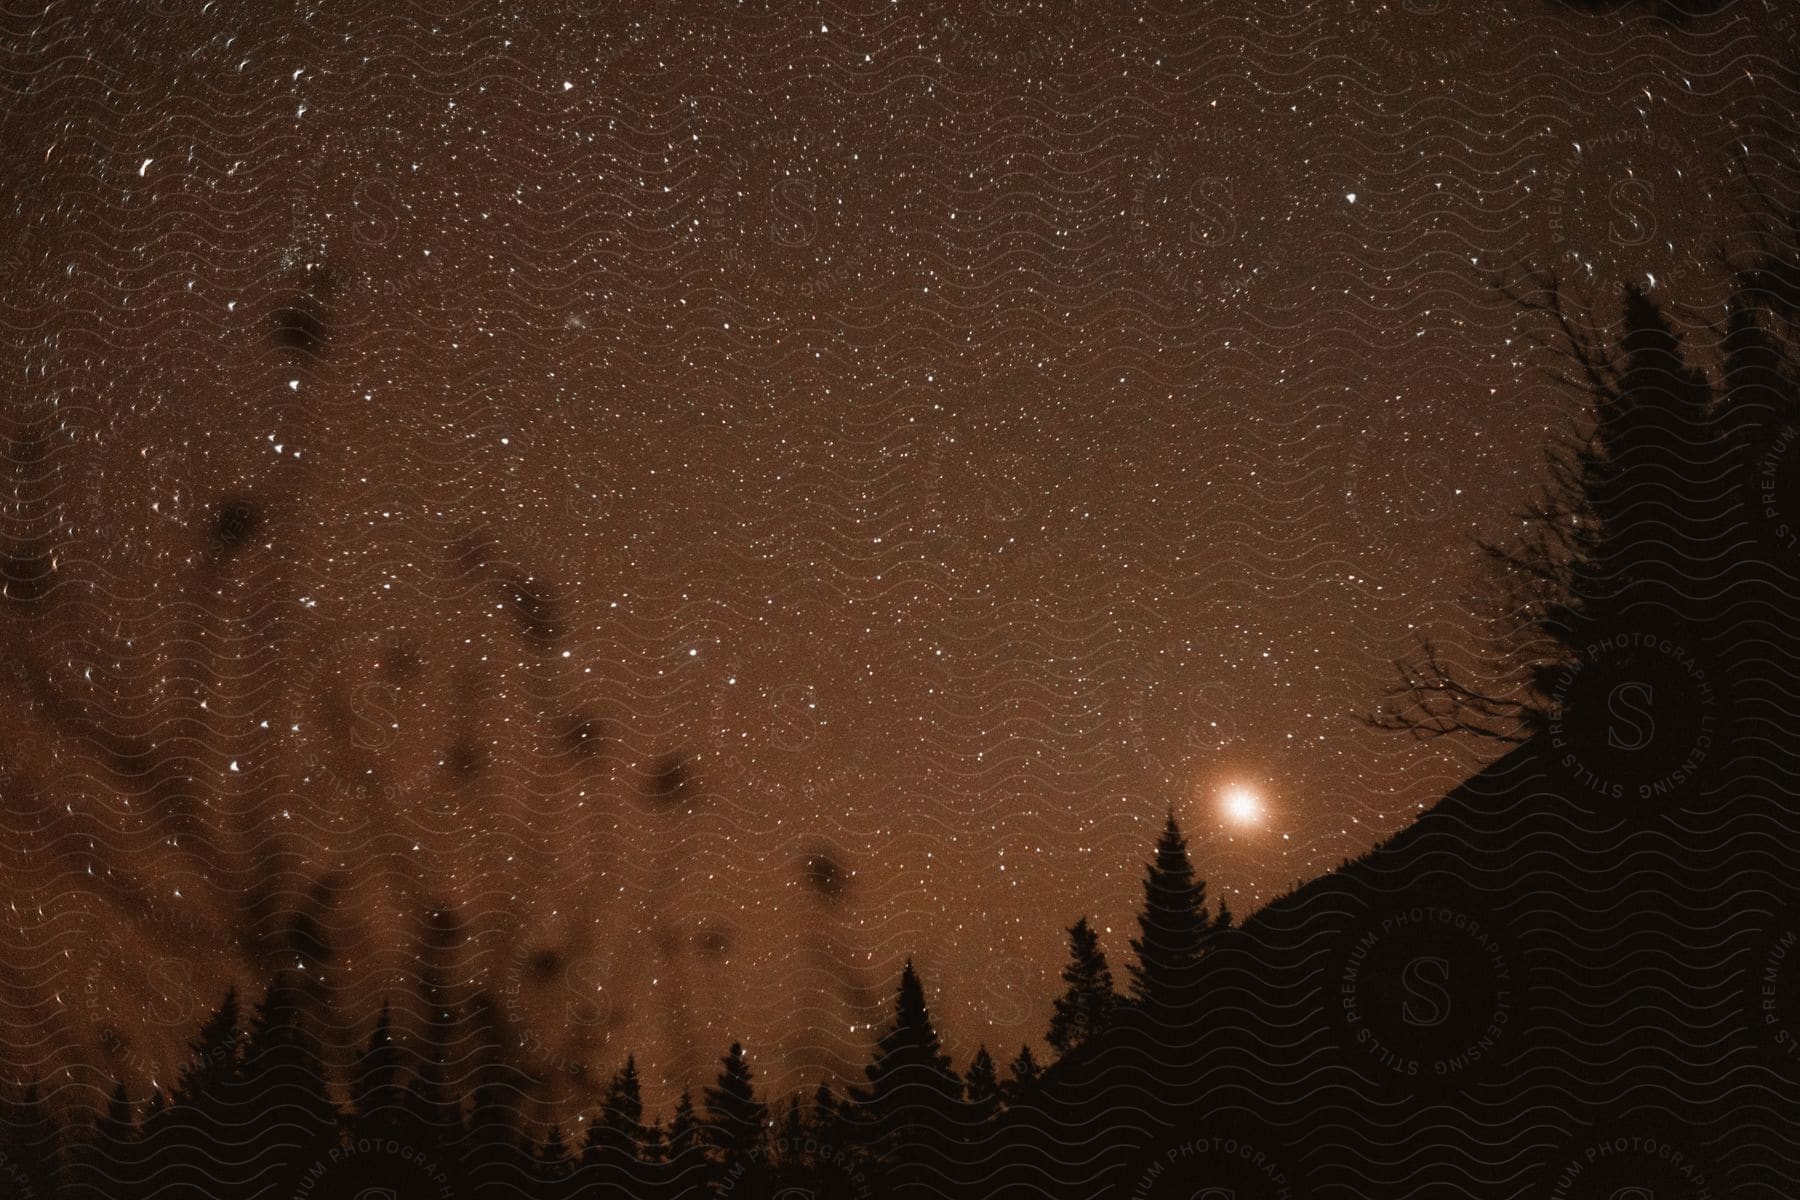 The night sky with many stars present in the light brown toned sky.